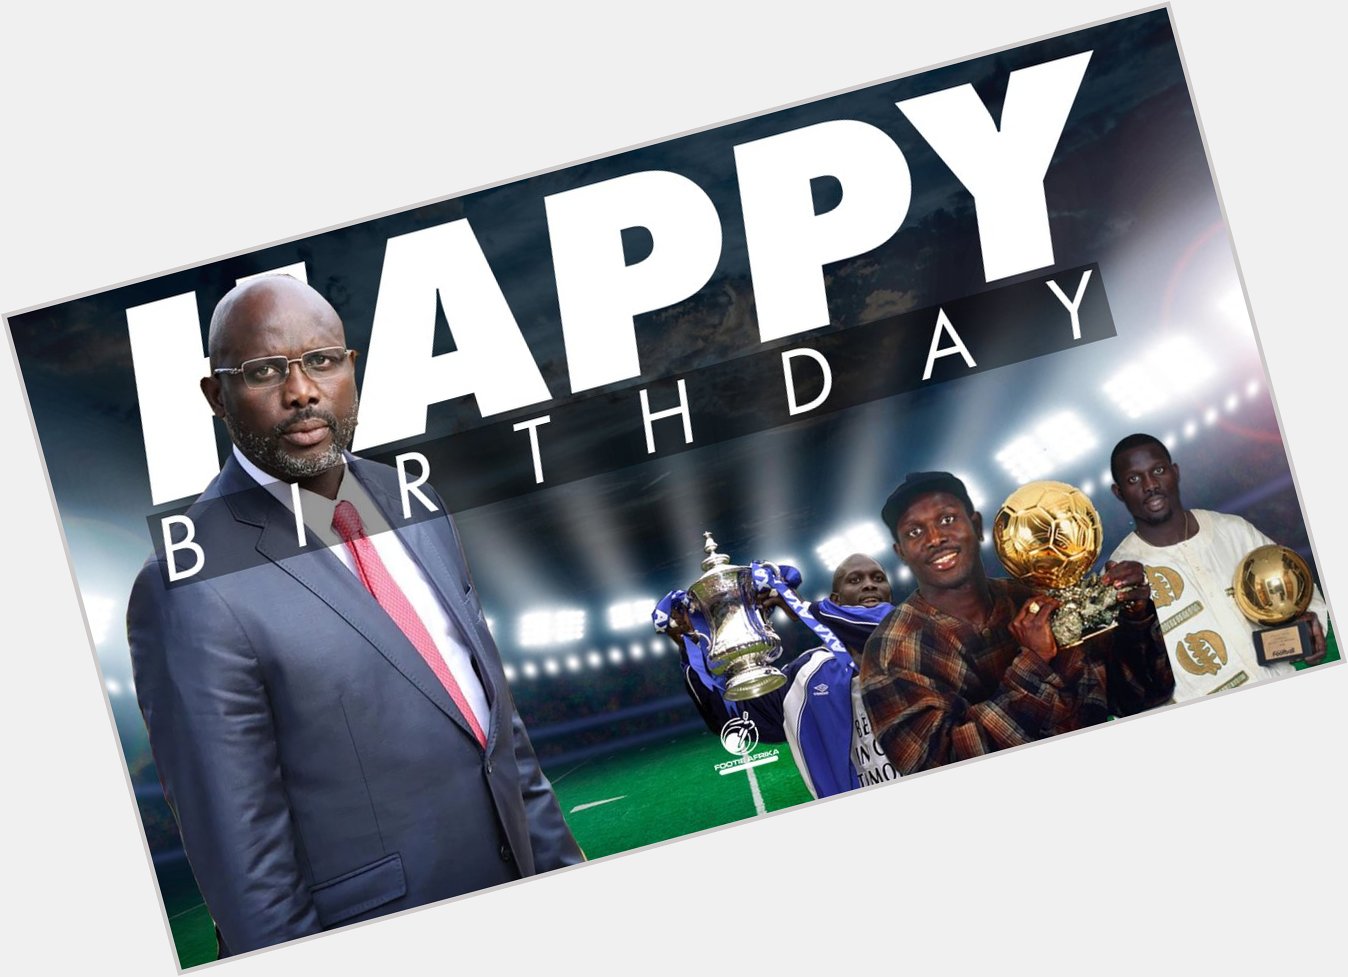   Happy 5 4 th Birthday to The African Legend and the President of Liberia, George Weah.  